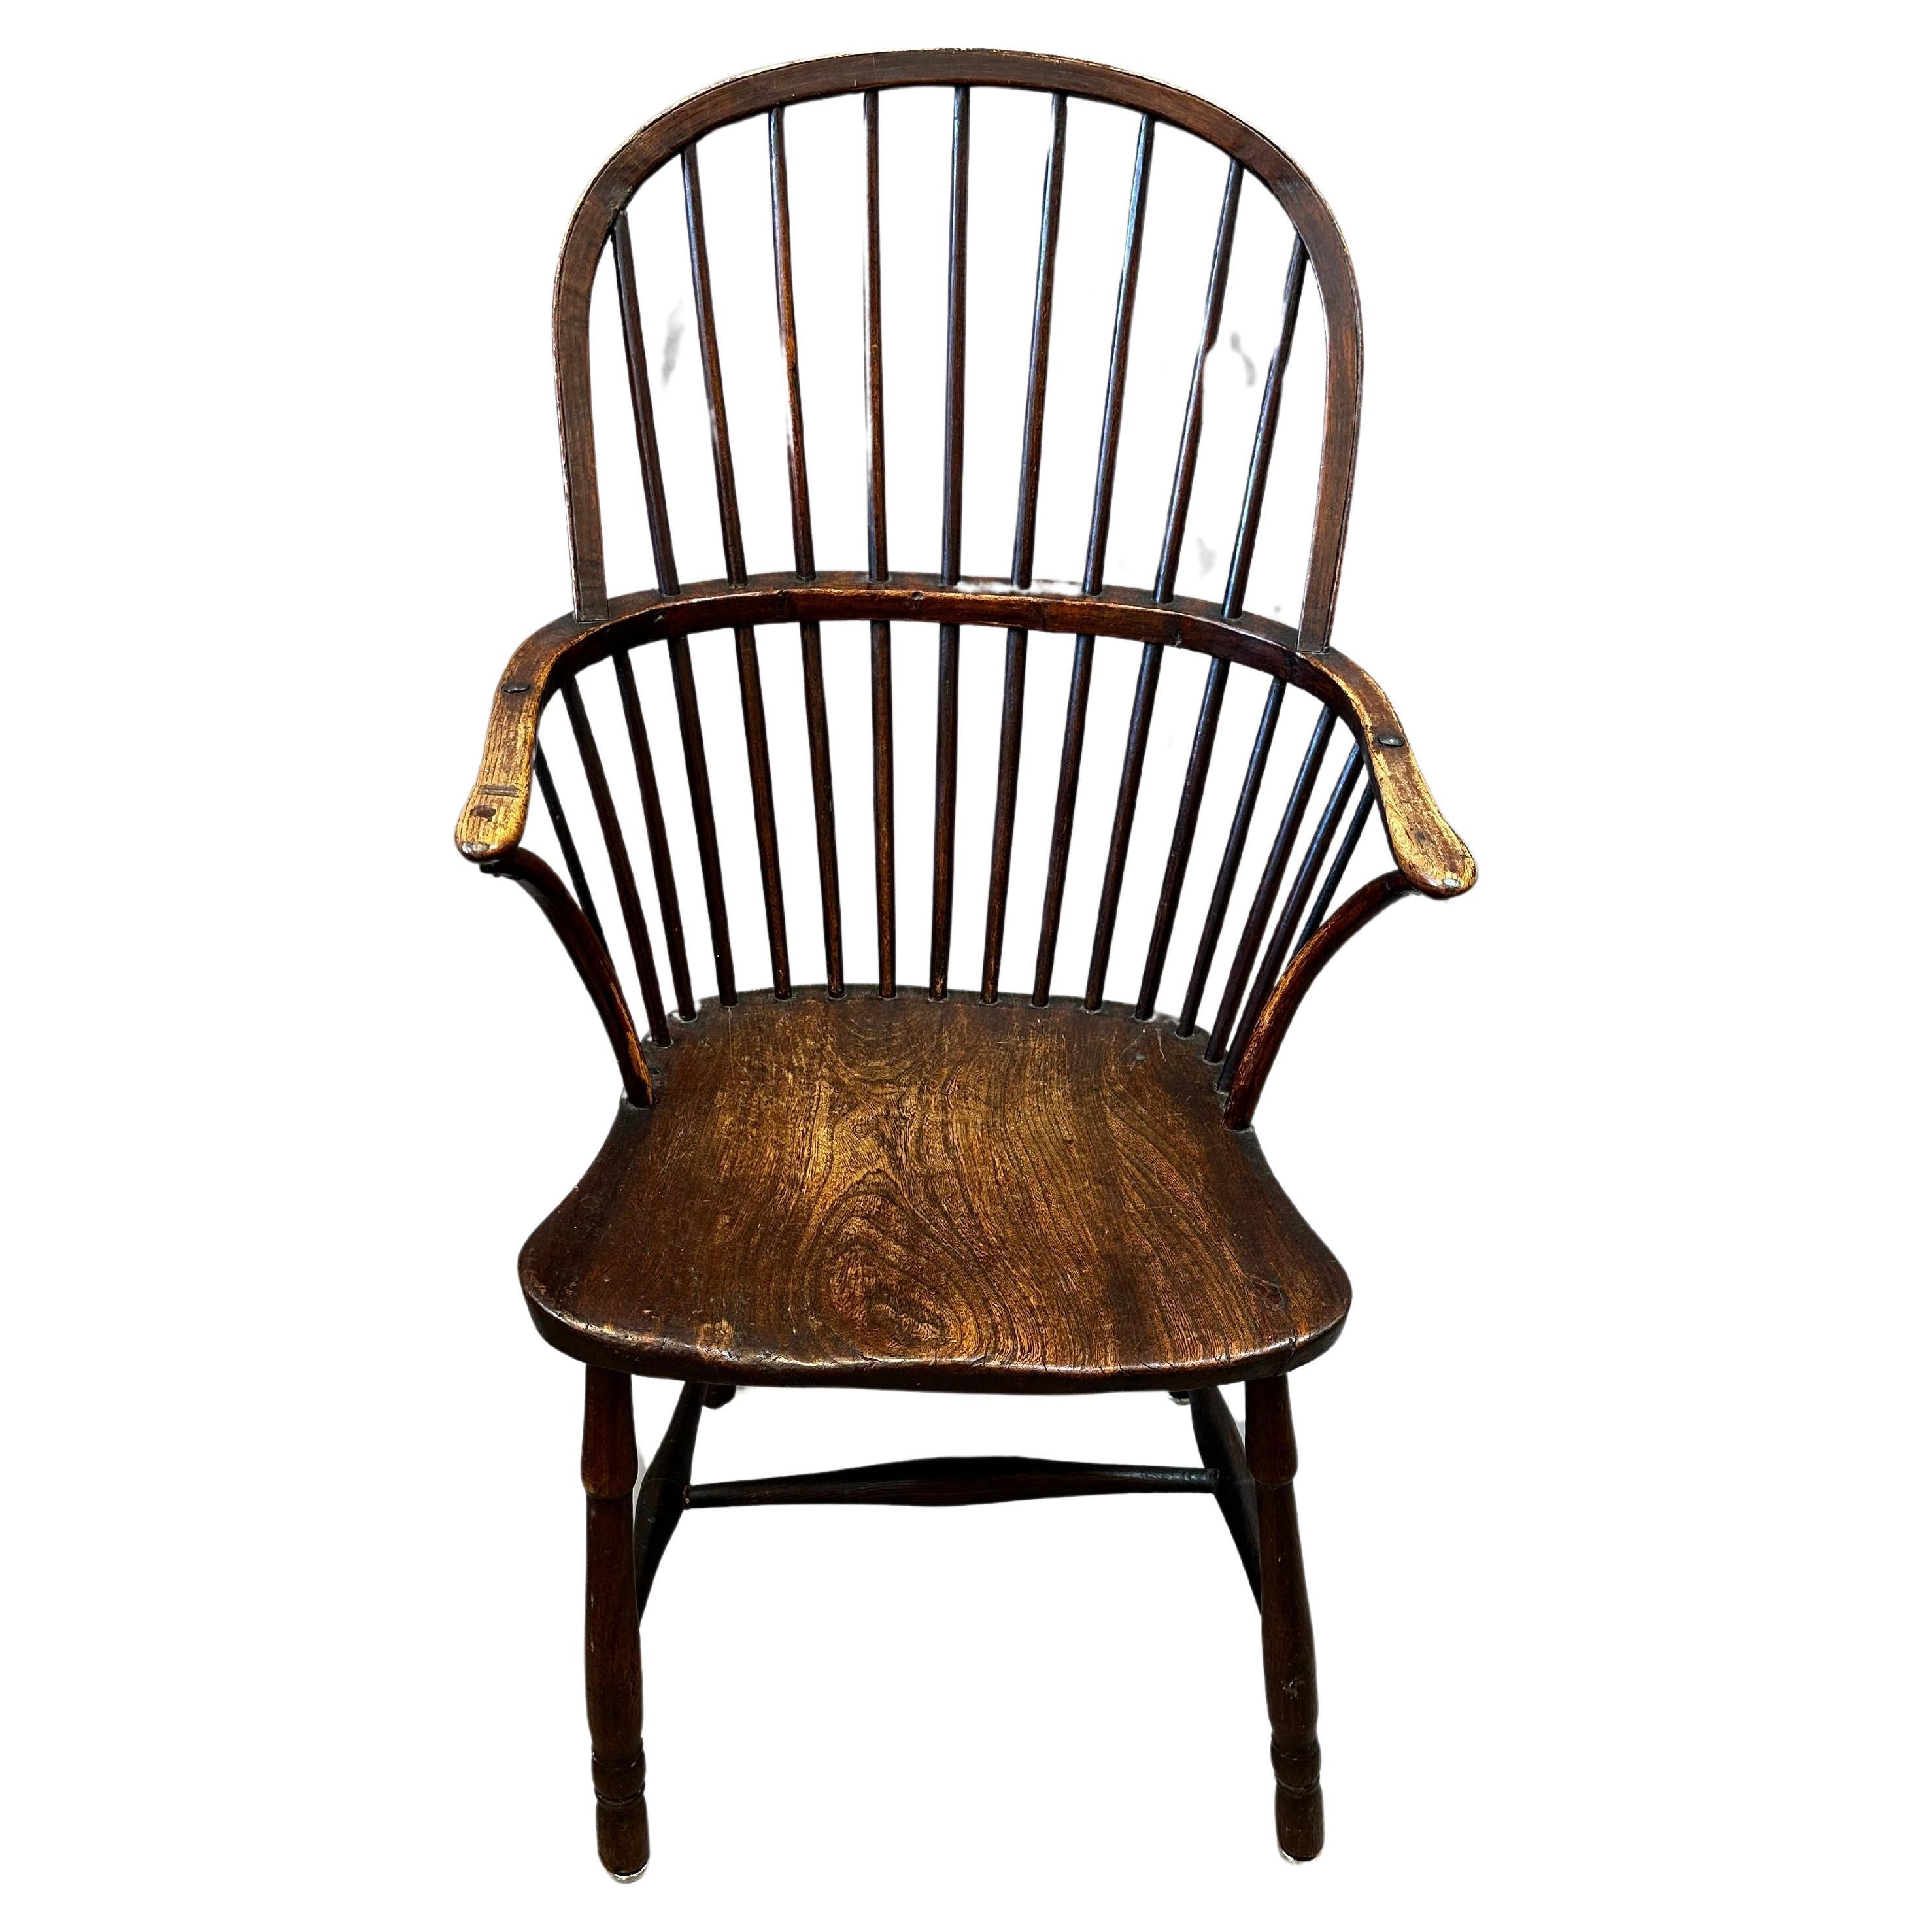  Late 18th Century English Windsor Armchair For Sale